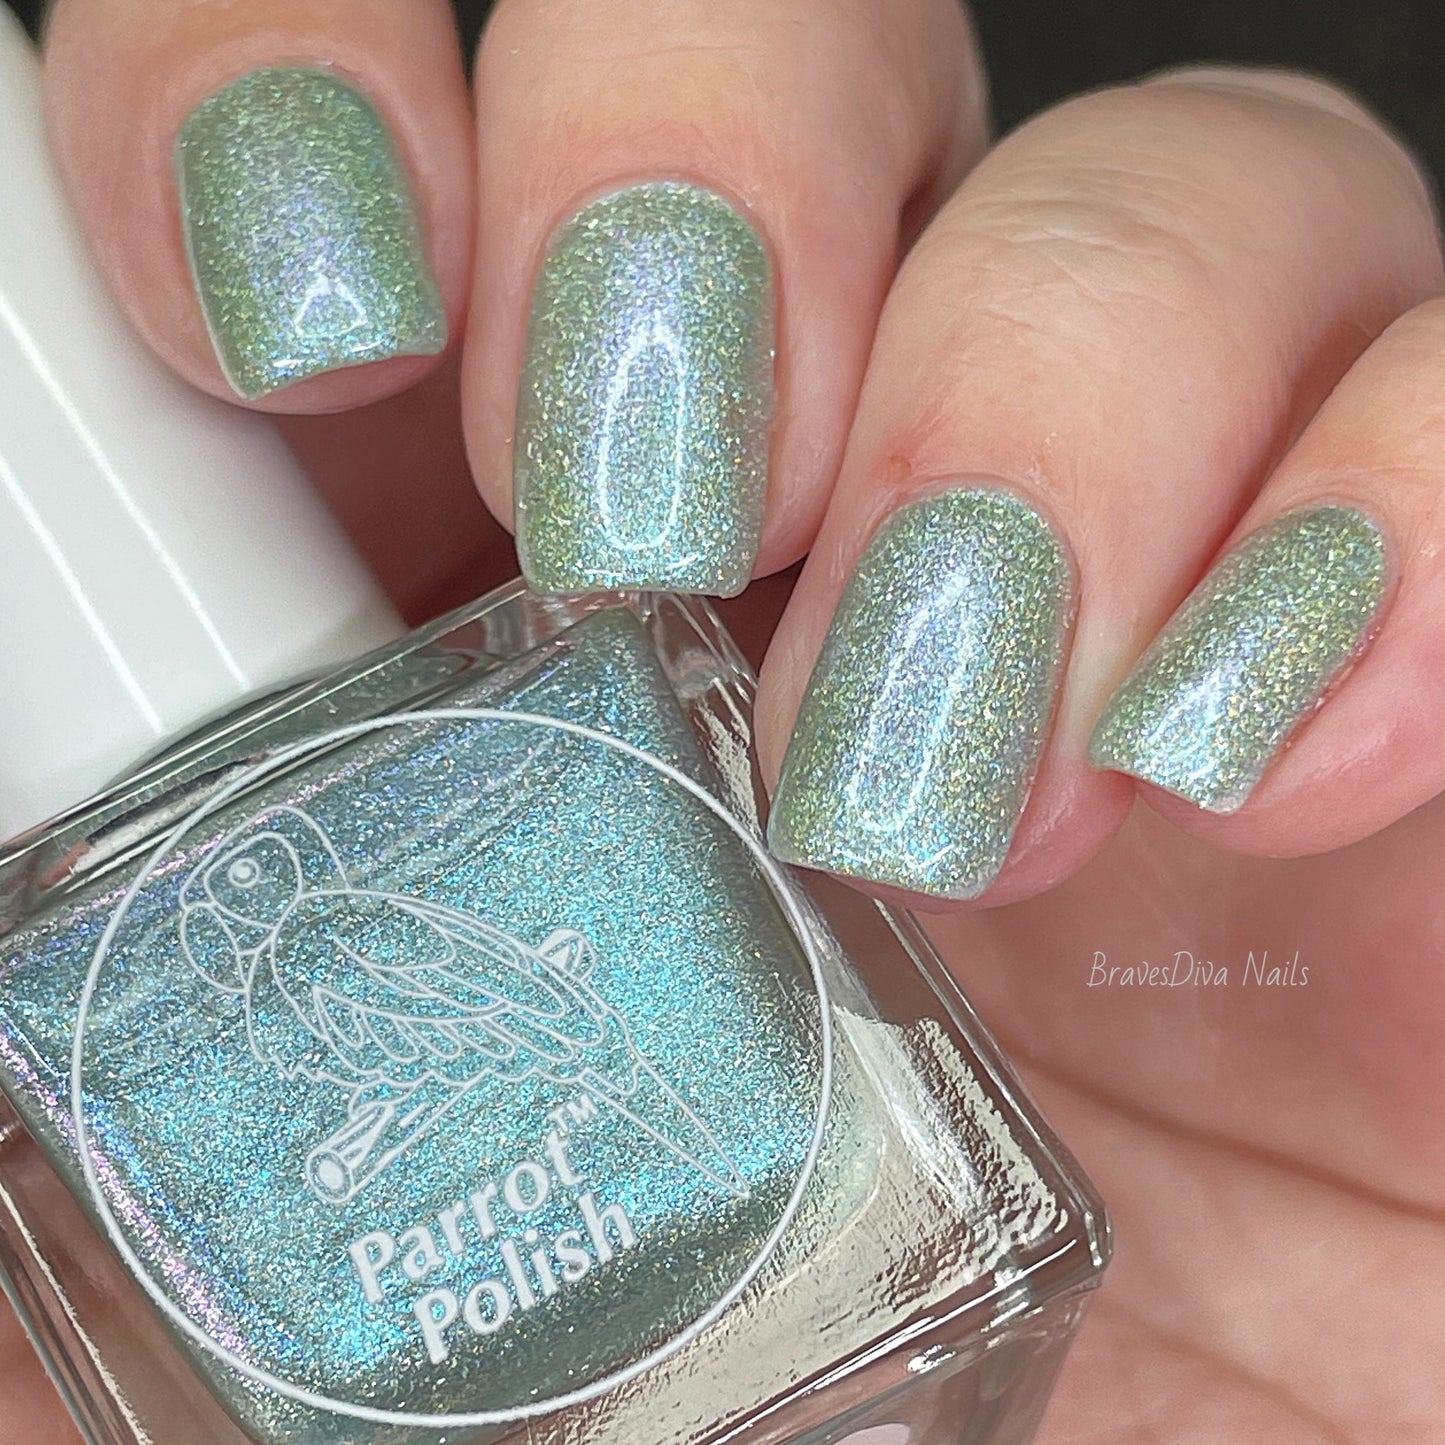 Parrot Polish "Courage" 2024 Spring  Aqua/Gold Ultrachrome Holographic